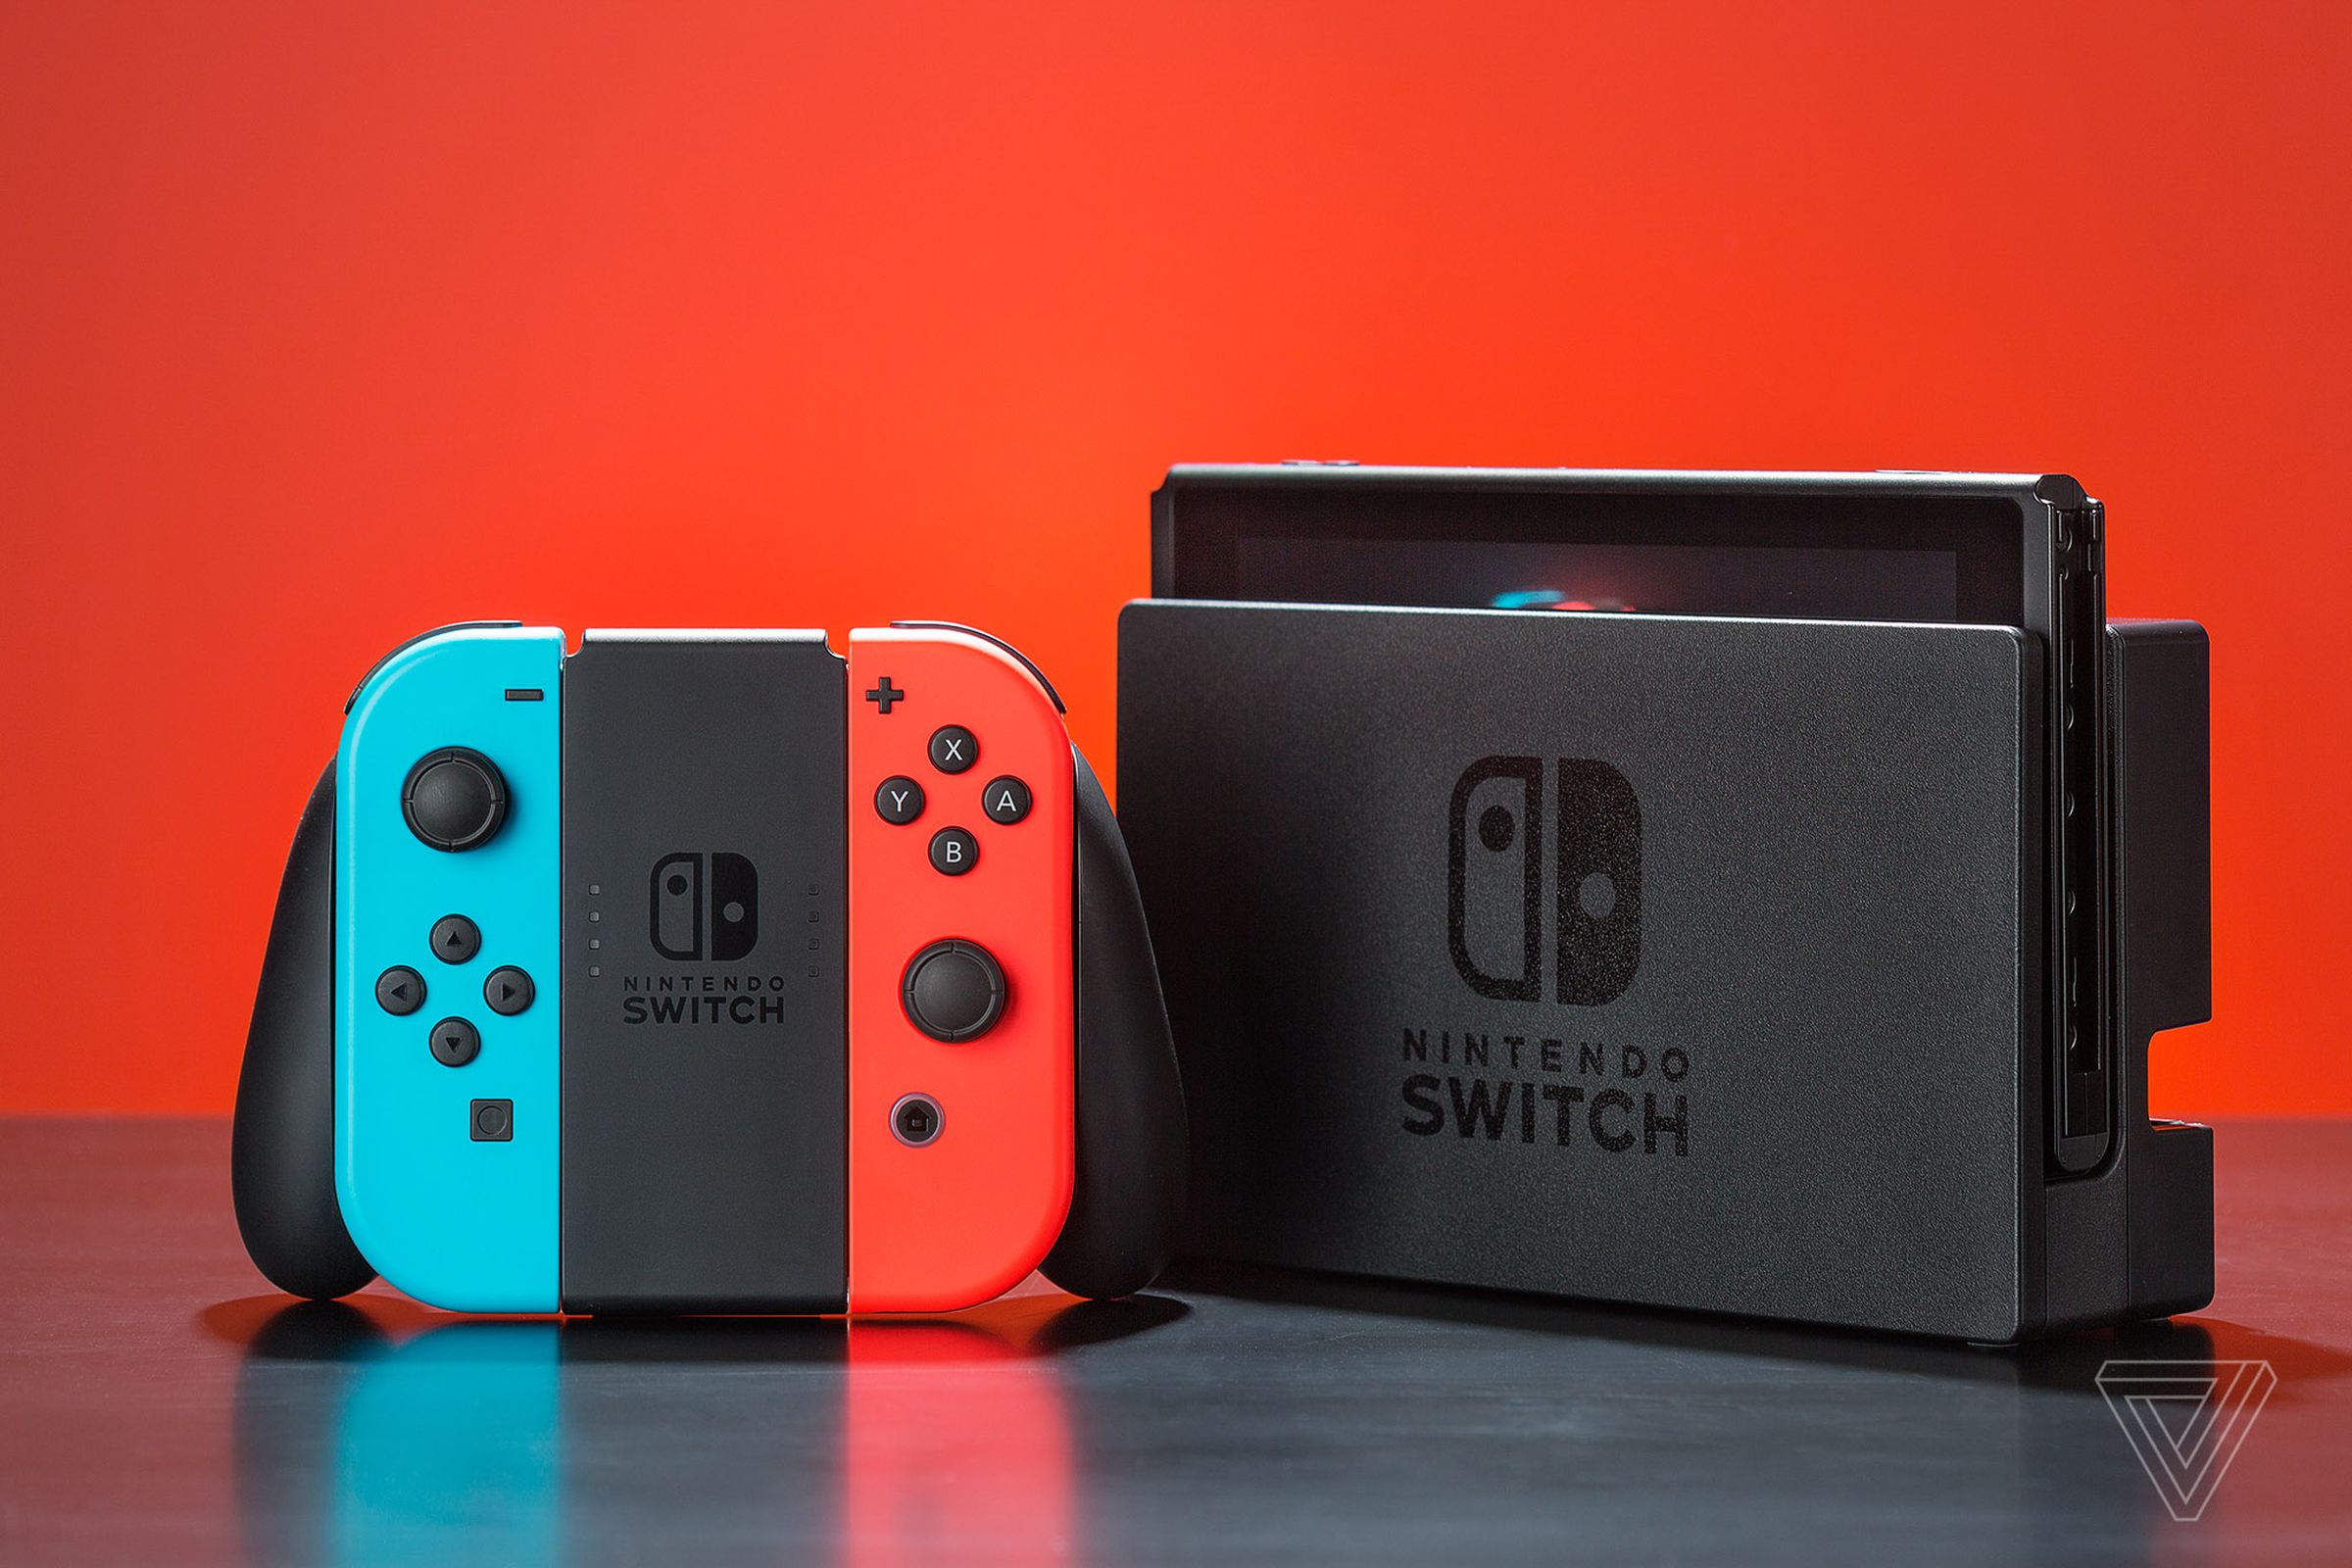 Nintendo’s Switch rarely sees a discount, though you can often save money by purchasing a refurbished model through its site.